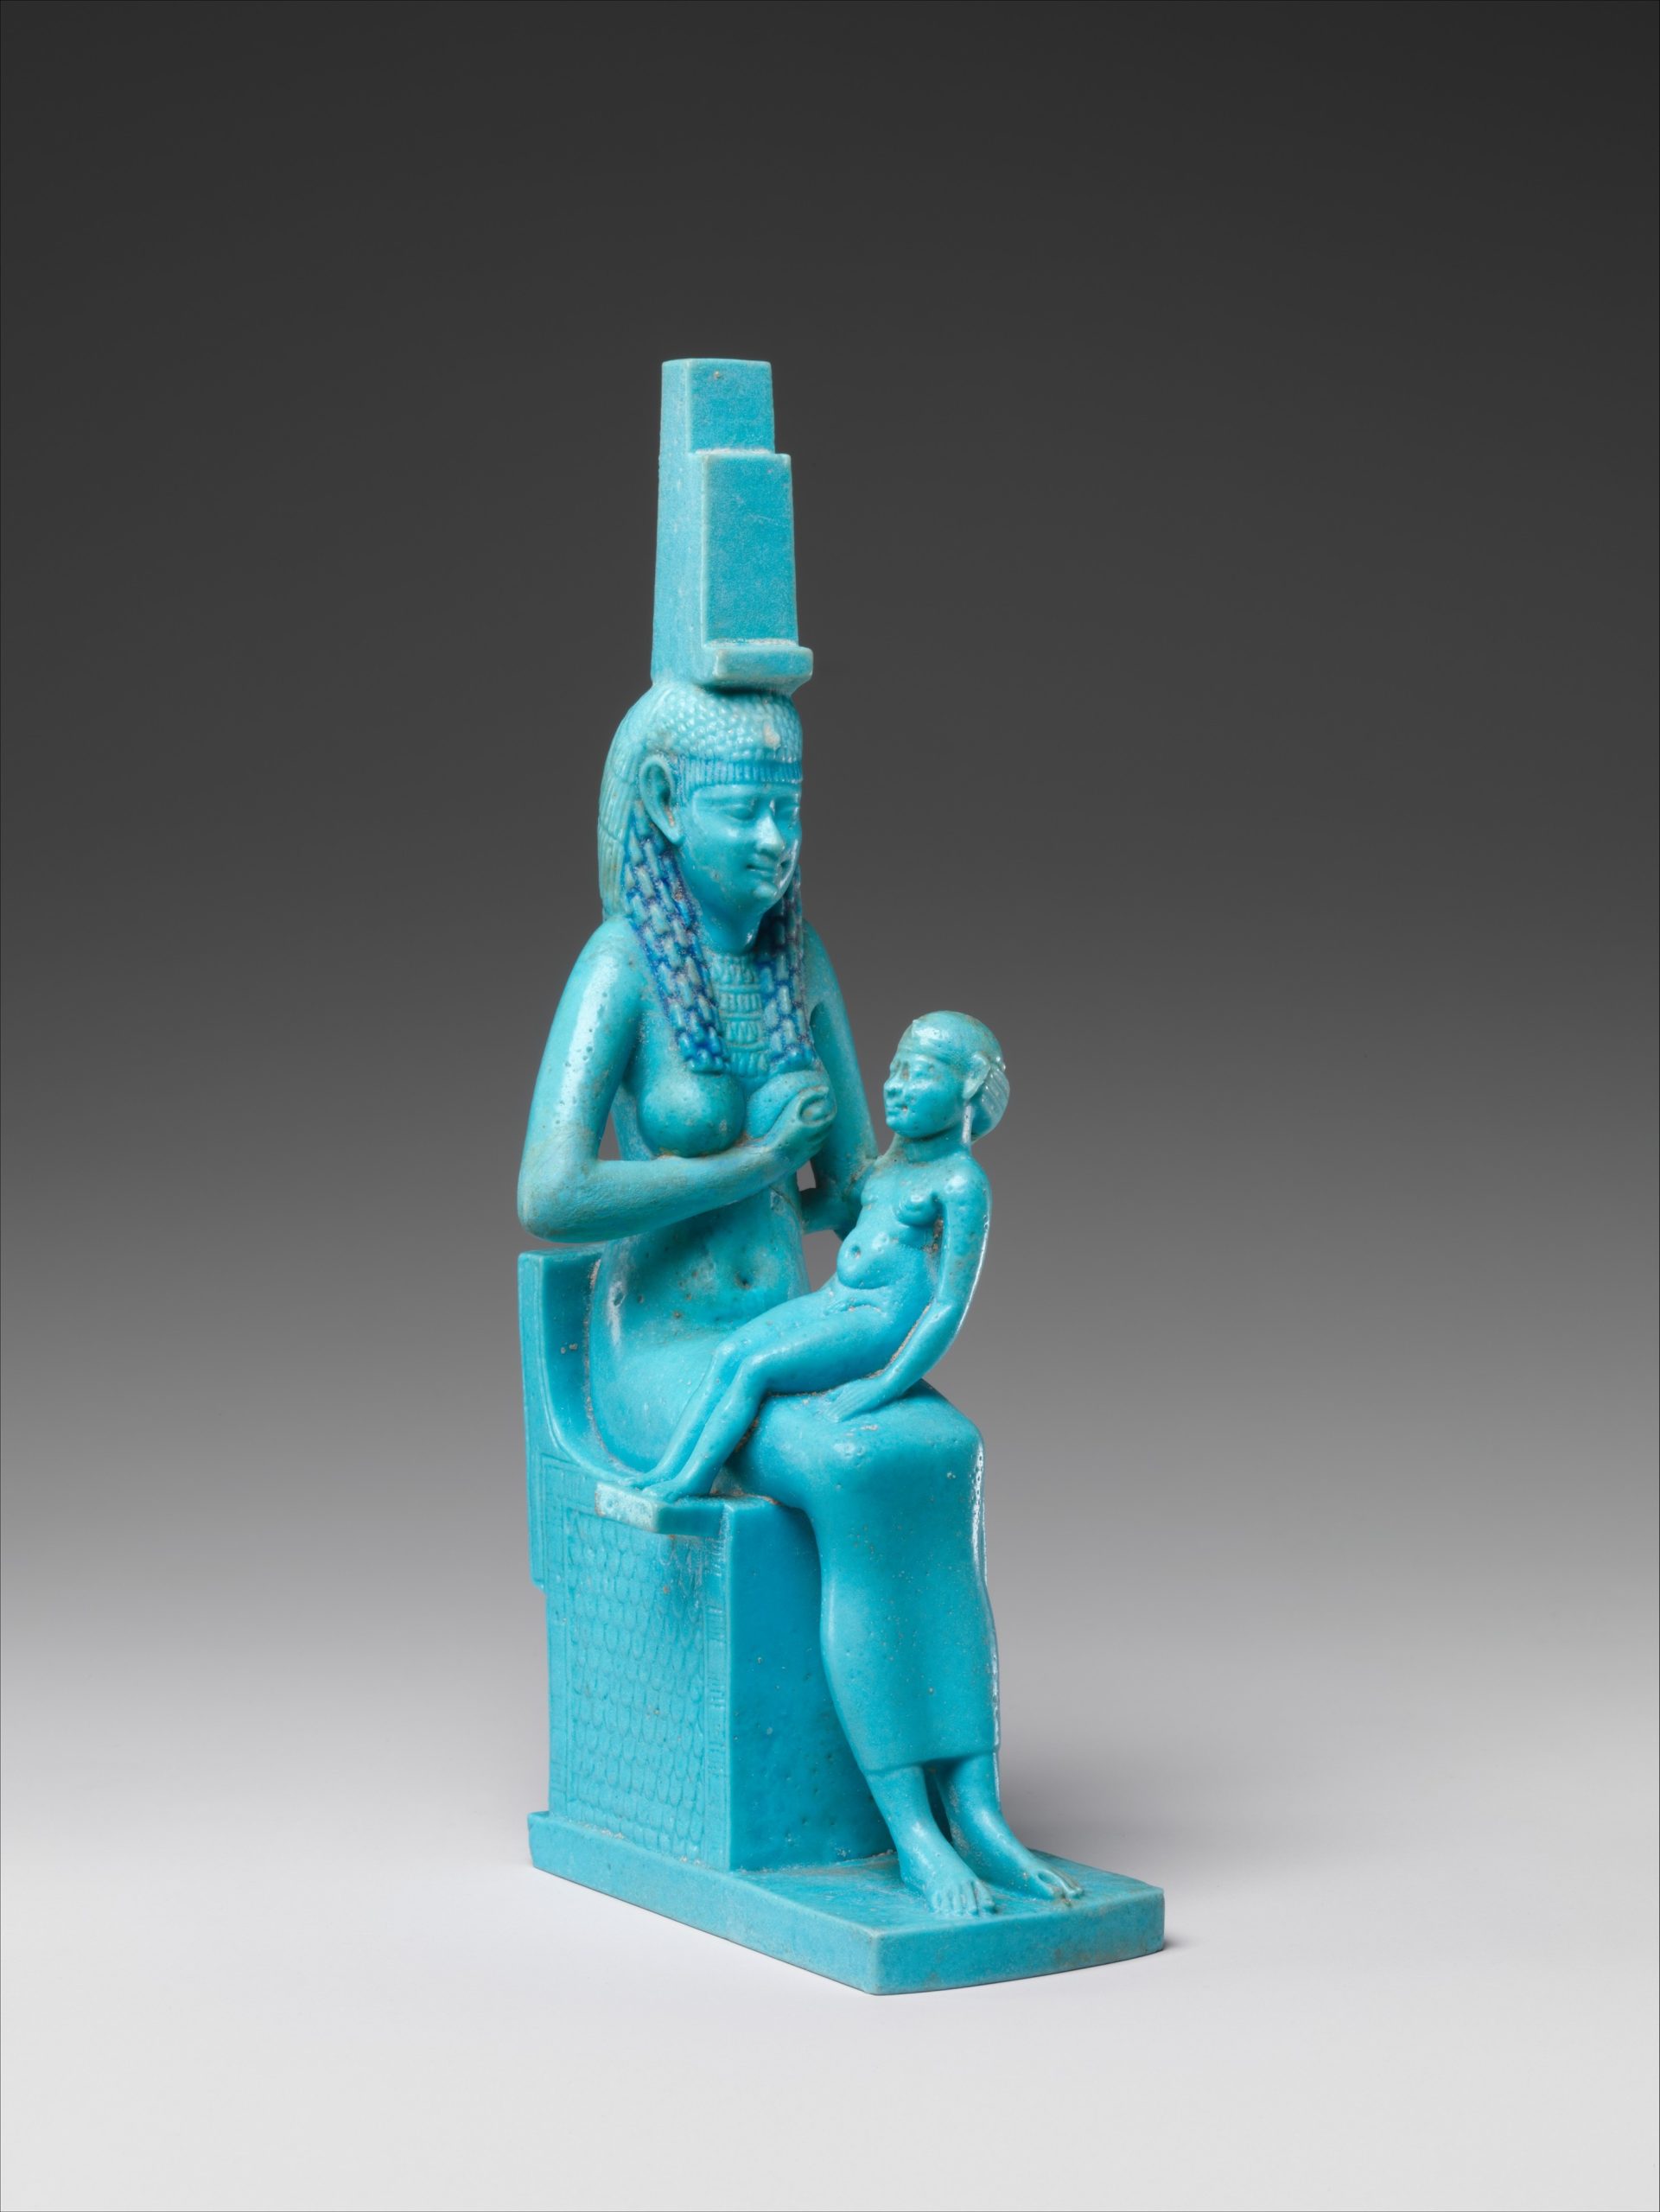 Egyptian Goddess Isis sitting with son Horus. Exemplifying a symbol of fertility. The medium used: Faience The dimensions: H. 17 cm (6 11/16 in); W. 5.1 cm (2 in.); D. 7.7 cm (3 1/16 in.) Era: Ptolemaic Period Date: 332–30 B.C.